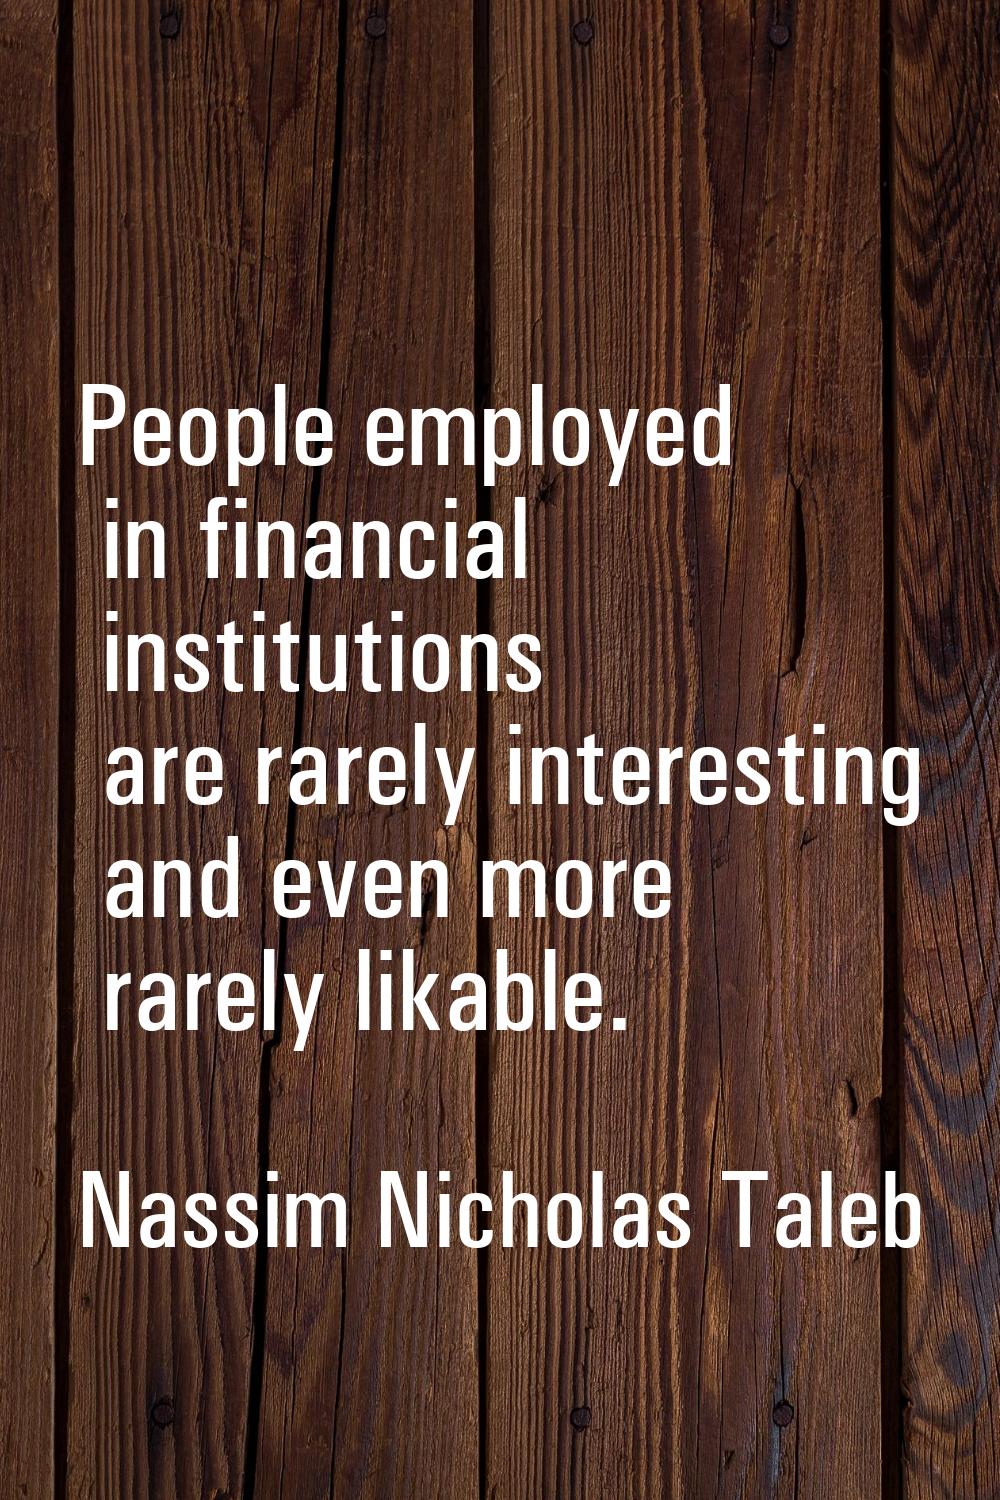 People employed in financial institutions are rarely interesting and even more rarely likable.